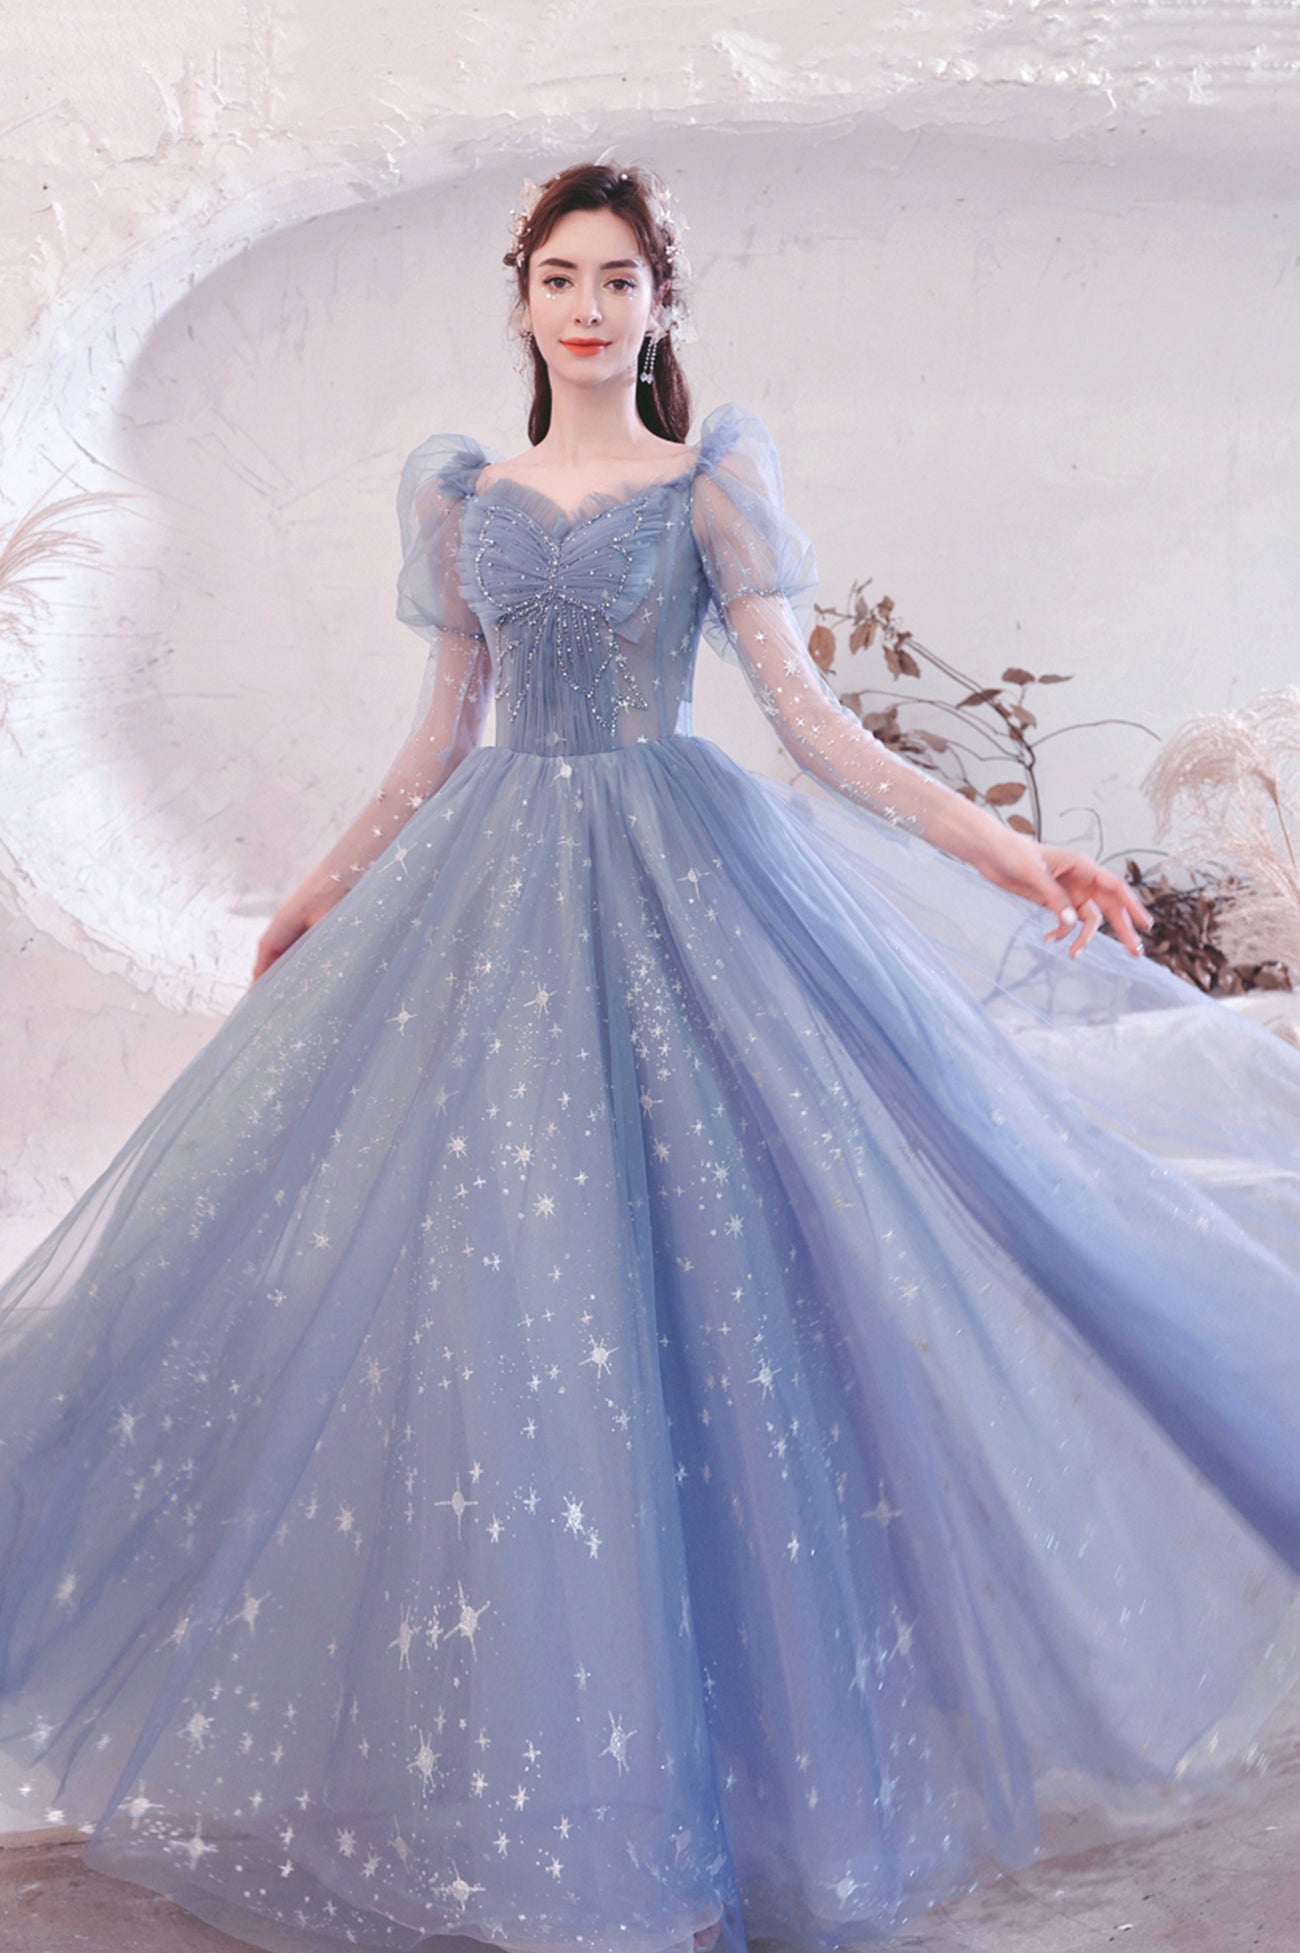 Blue Tulle Long Sleeve Prom Dress, A-Line Long Sleeve Tulle Evening Party Dress